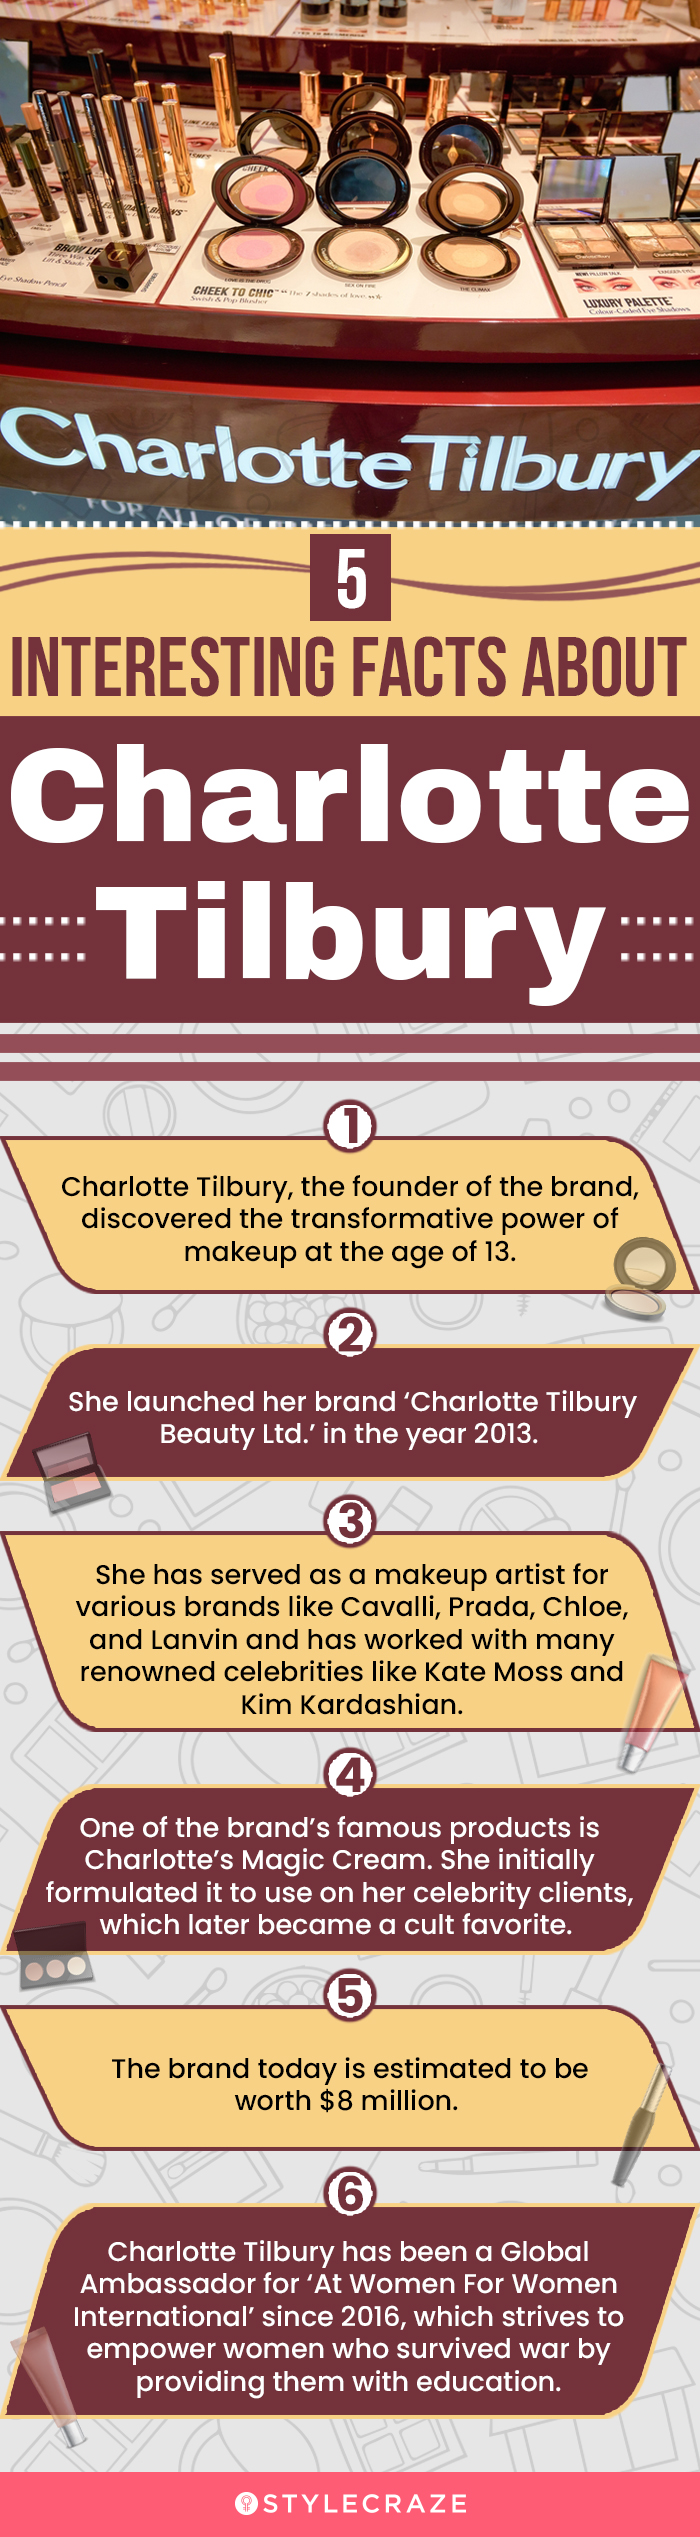 5 Interesting Facts About Charlotte Tilbury(infographic)